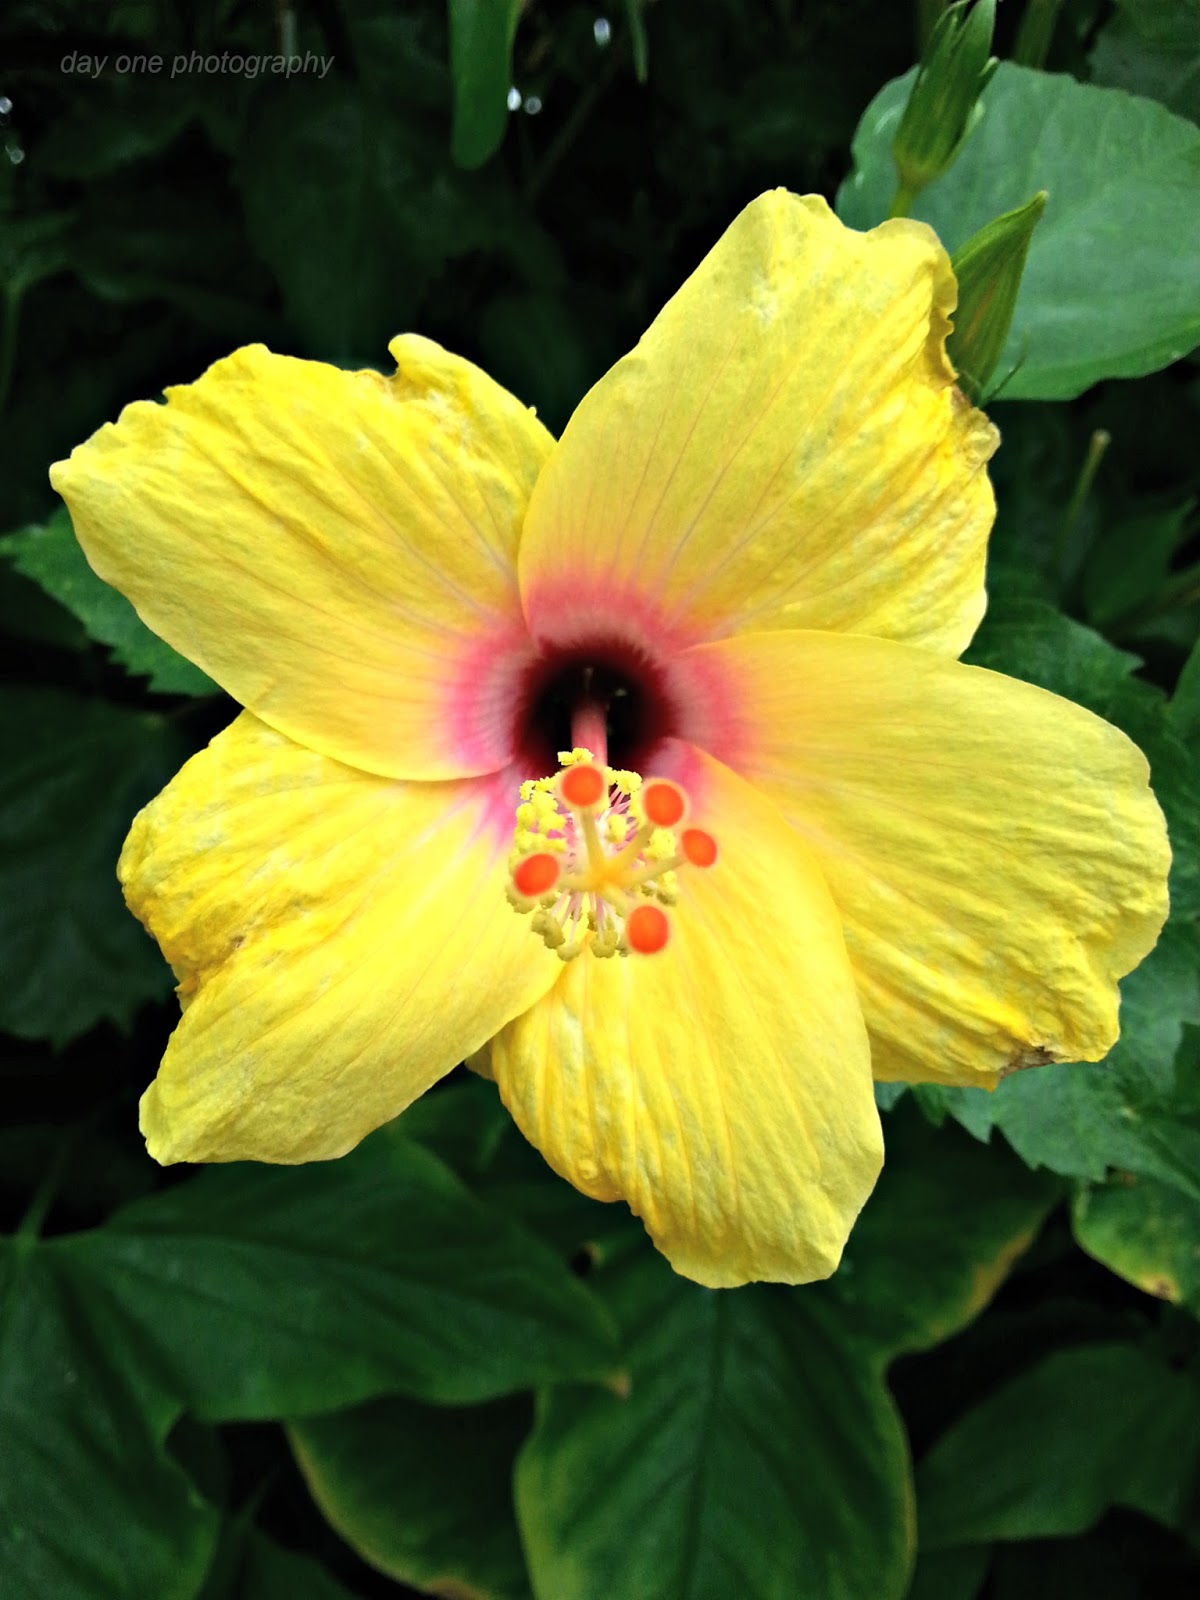 Day One Photography: Yellow Hibiscus With A Pink Center